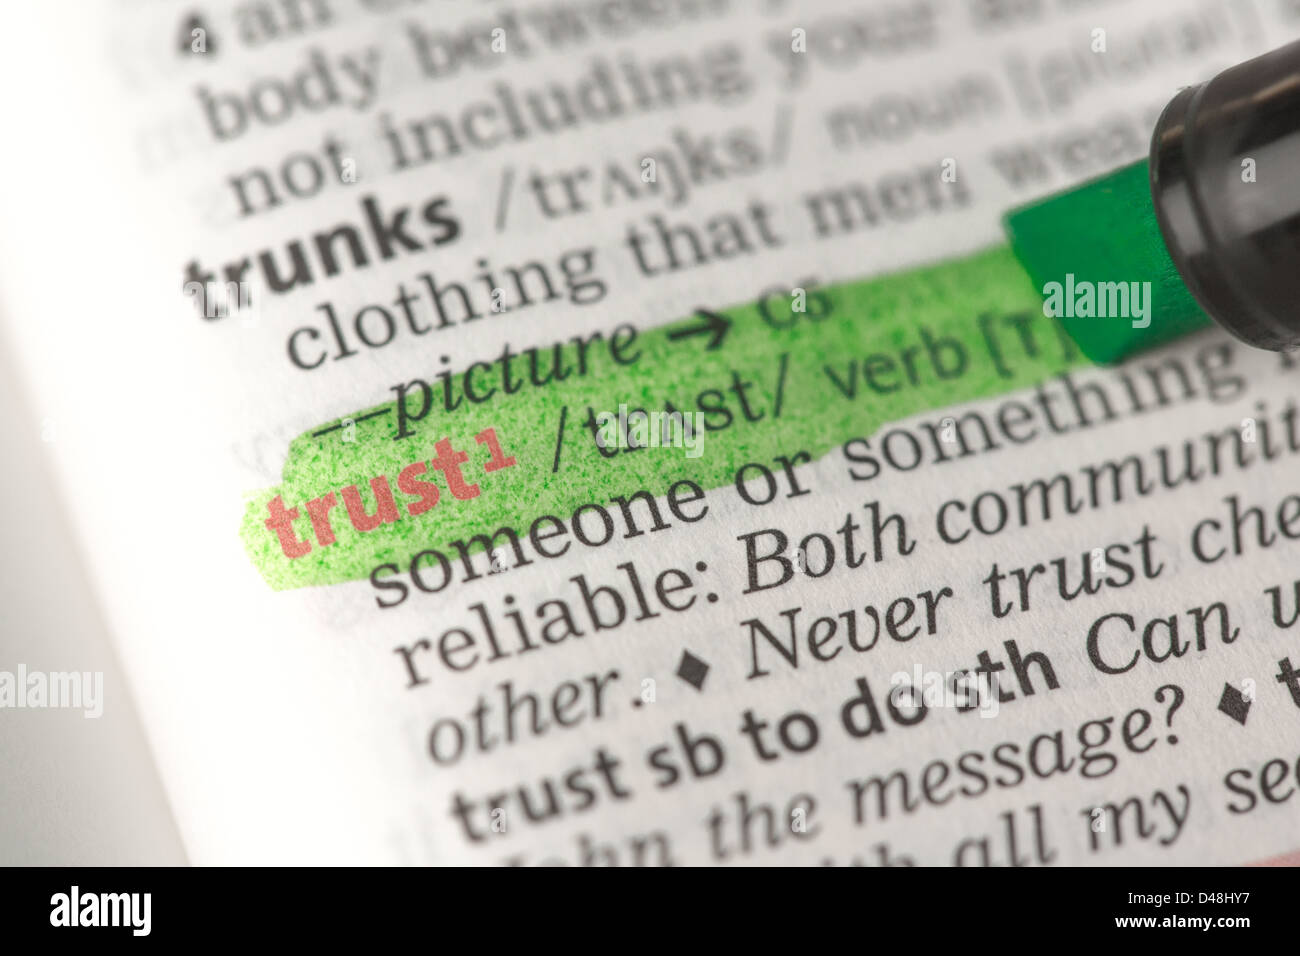 Trust definition highlighted in green Stock Photo